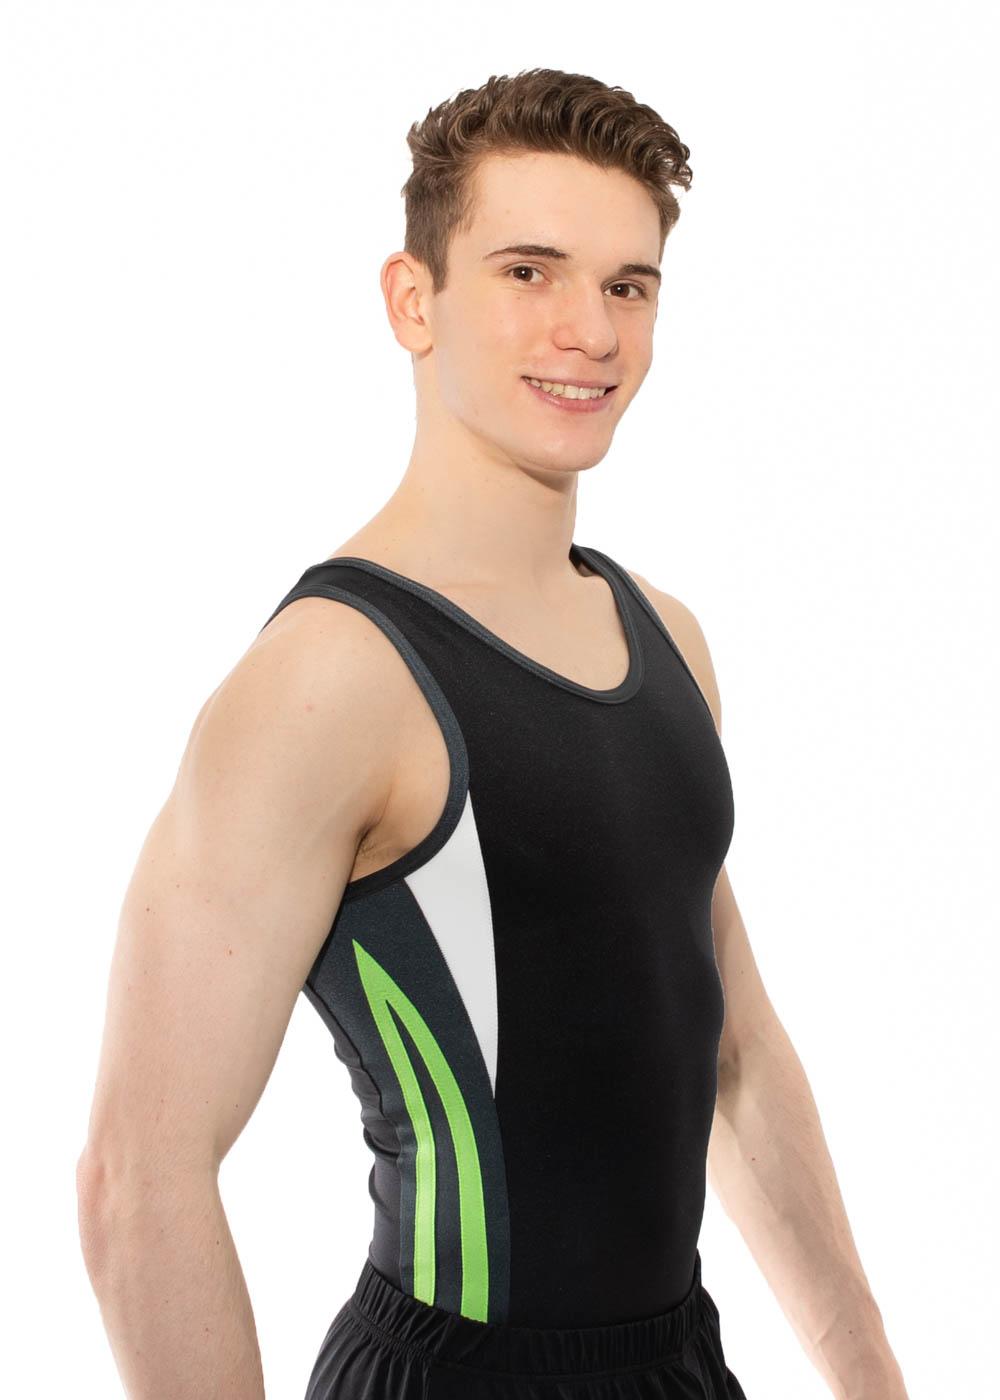 LUTHER - BV491:- Grey and White leotard with Flo green details - A Star ...